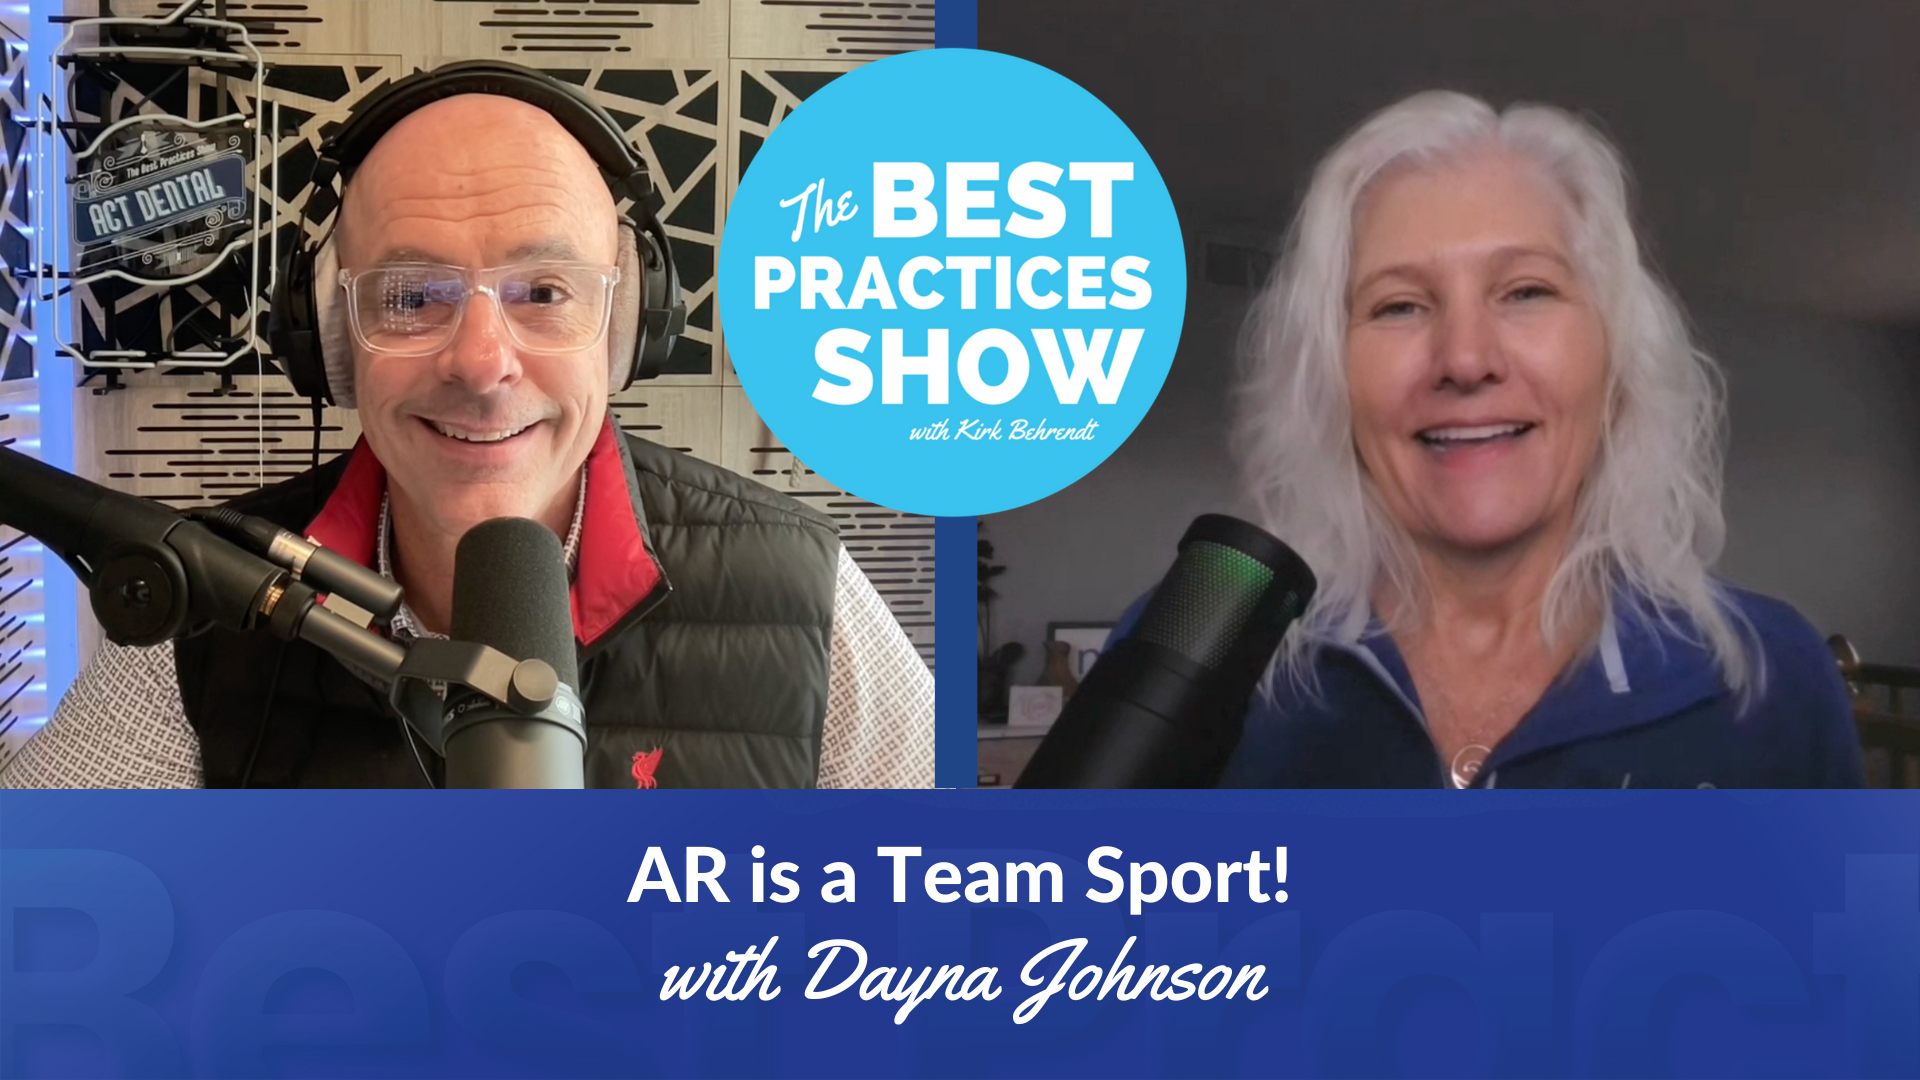 Collecting money is critical to your dental practice. Listen to expert Dayna Johnson share her systematic approach in Episode 666 of The Best Practices Show!